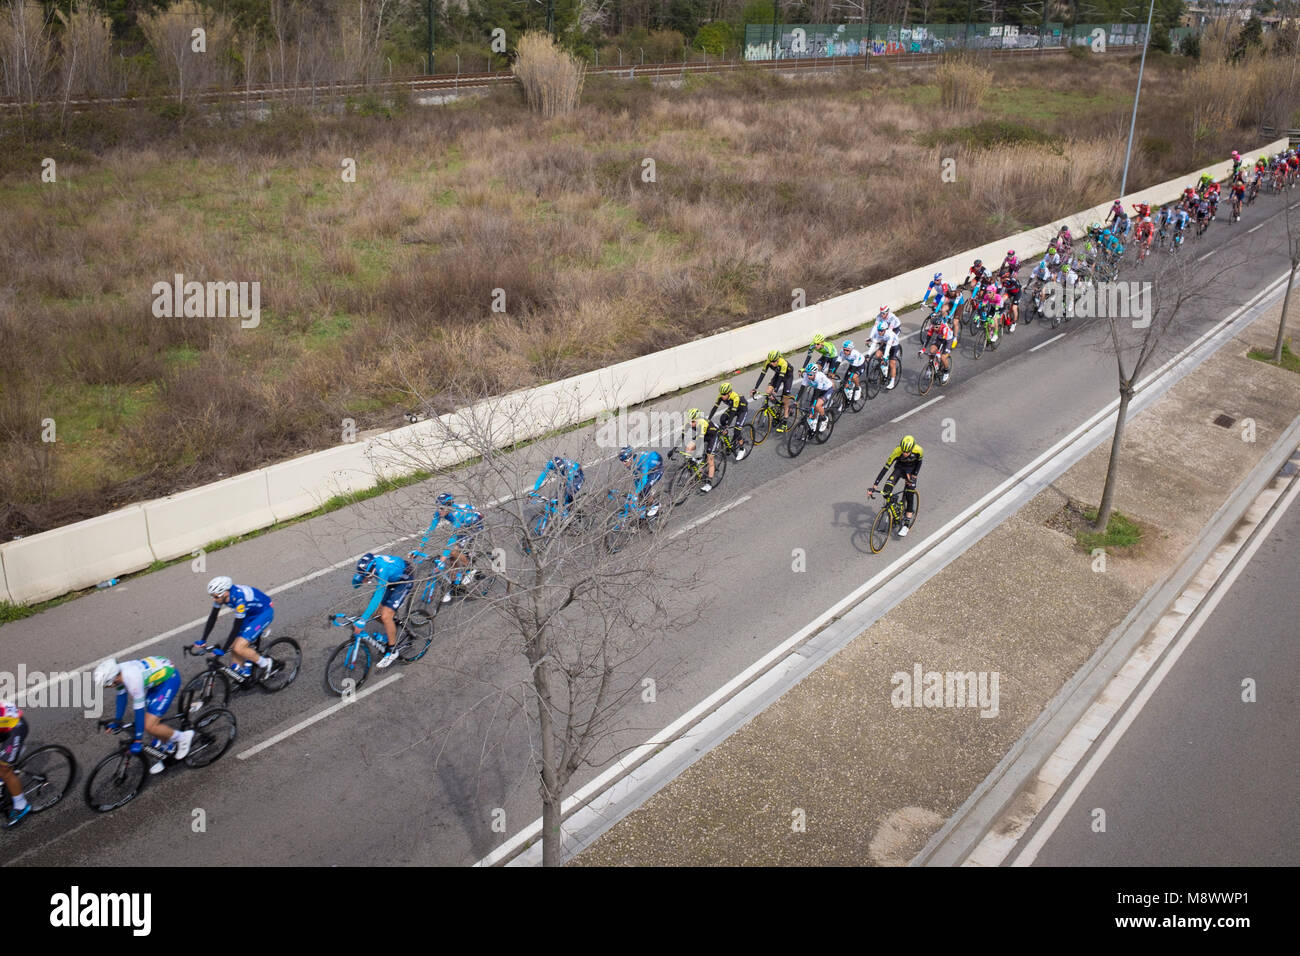 Sant Cugat del Valles, Spain. 20th March, 2018. Stage 2 of the Volta Catalunya 2018 cycle race passes through the outskirts of Sant Cugat del Valles, en route from Mataro to Valls. Credit: deadlyphoto.com/Alamy Live News Stock Photo